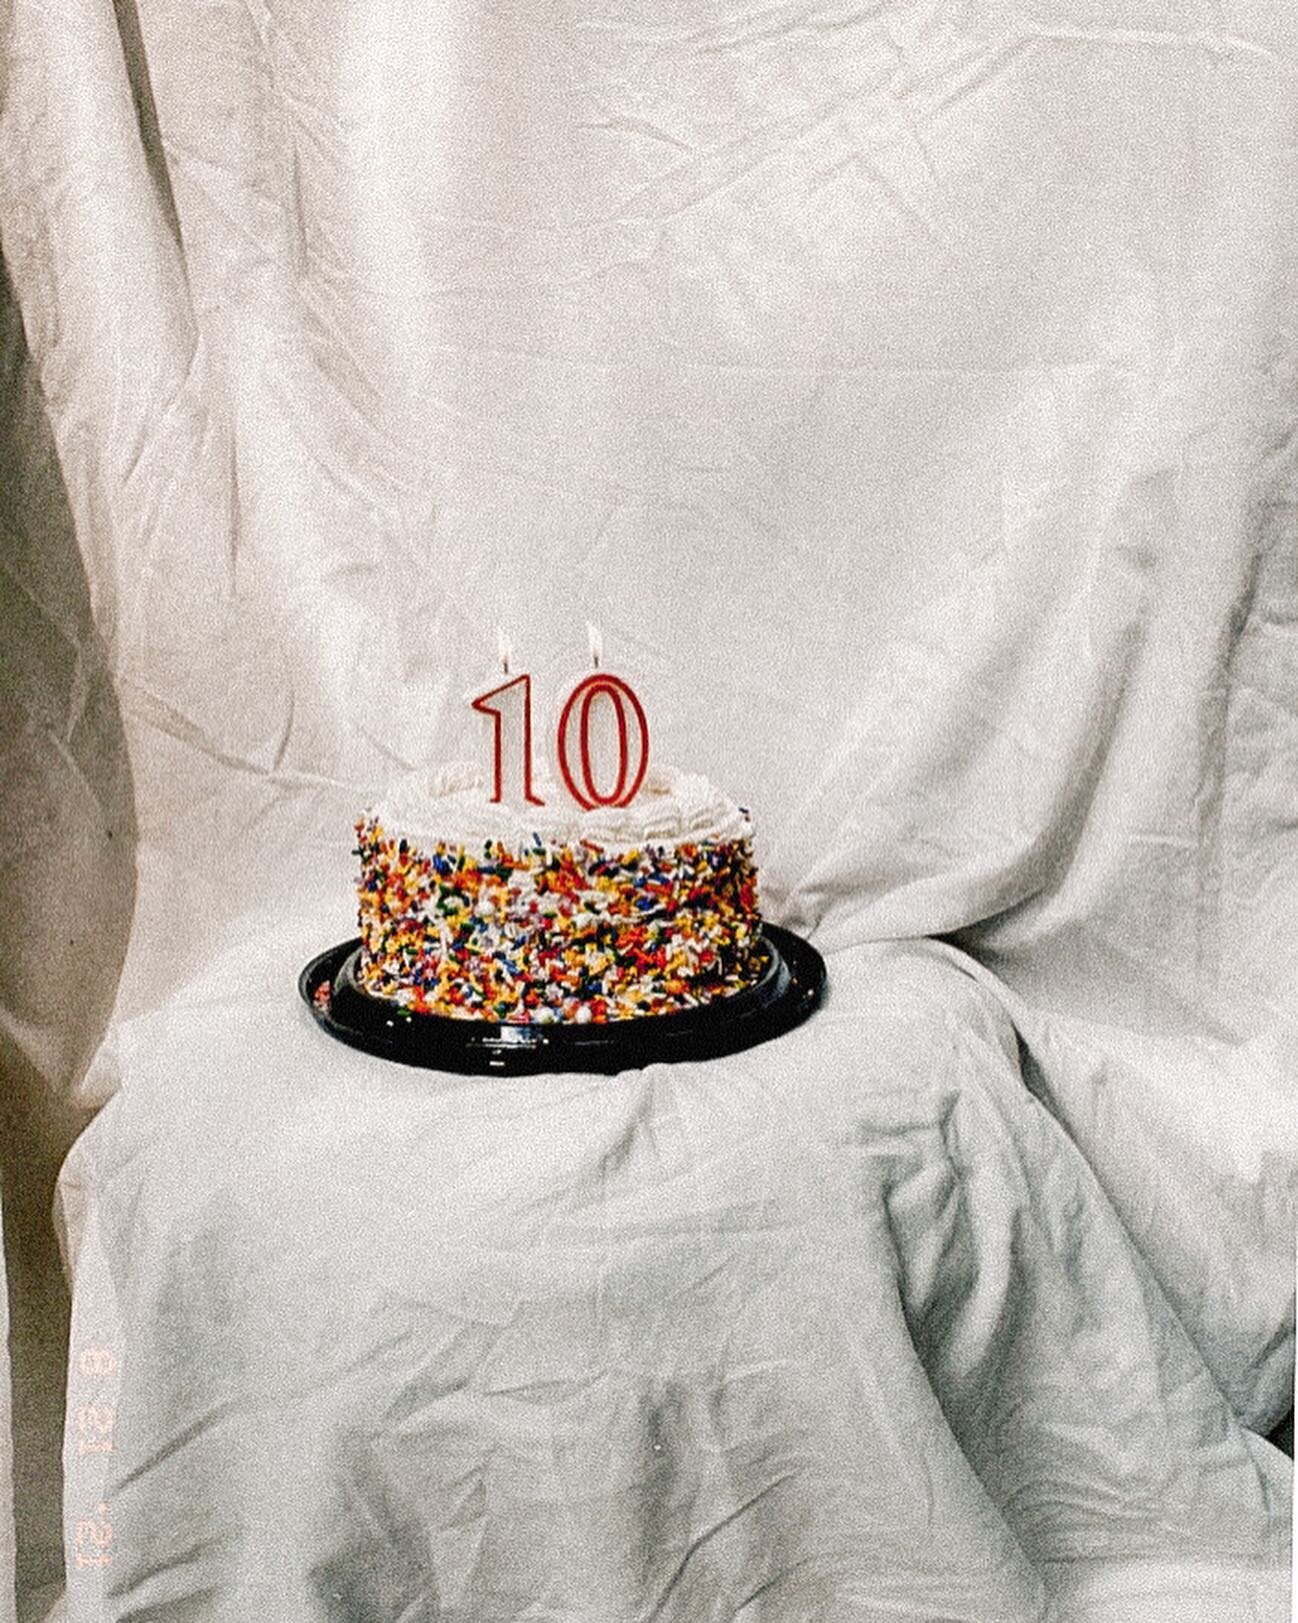 You really thought we&rsquo;d have a party without cake?!✂️🎂✨

Wow!! A HUGE thank you is in order to everyone who came to help us celebrate our 10th year! 🥳 We are overwhelmed by your support, and can not wait to see what the next 10 years brings u